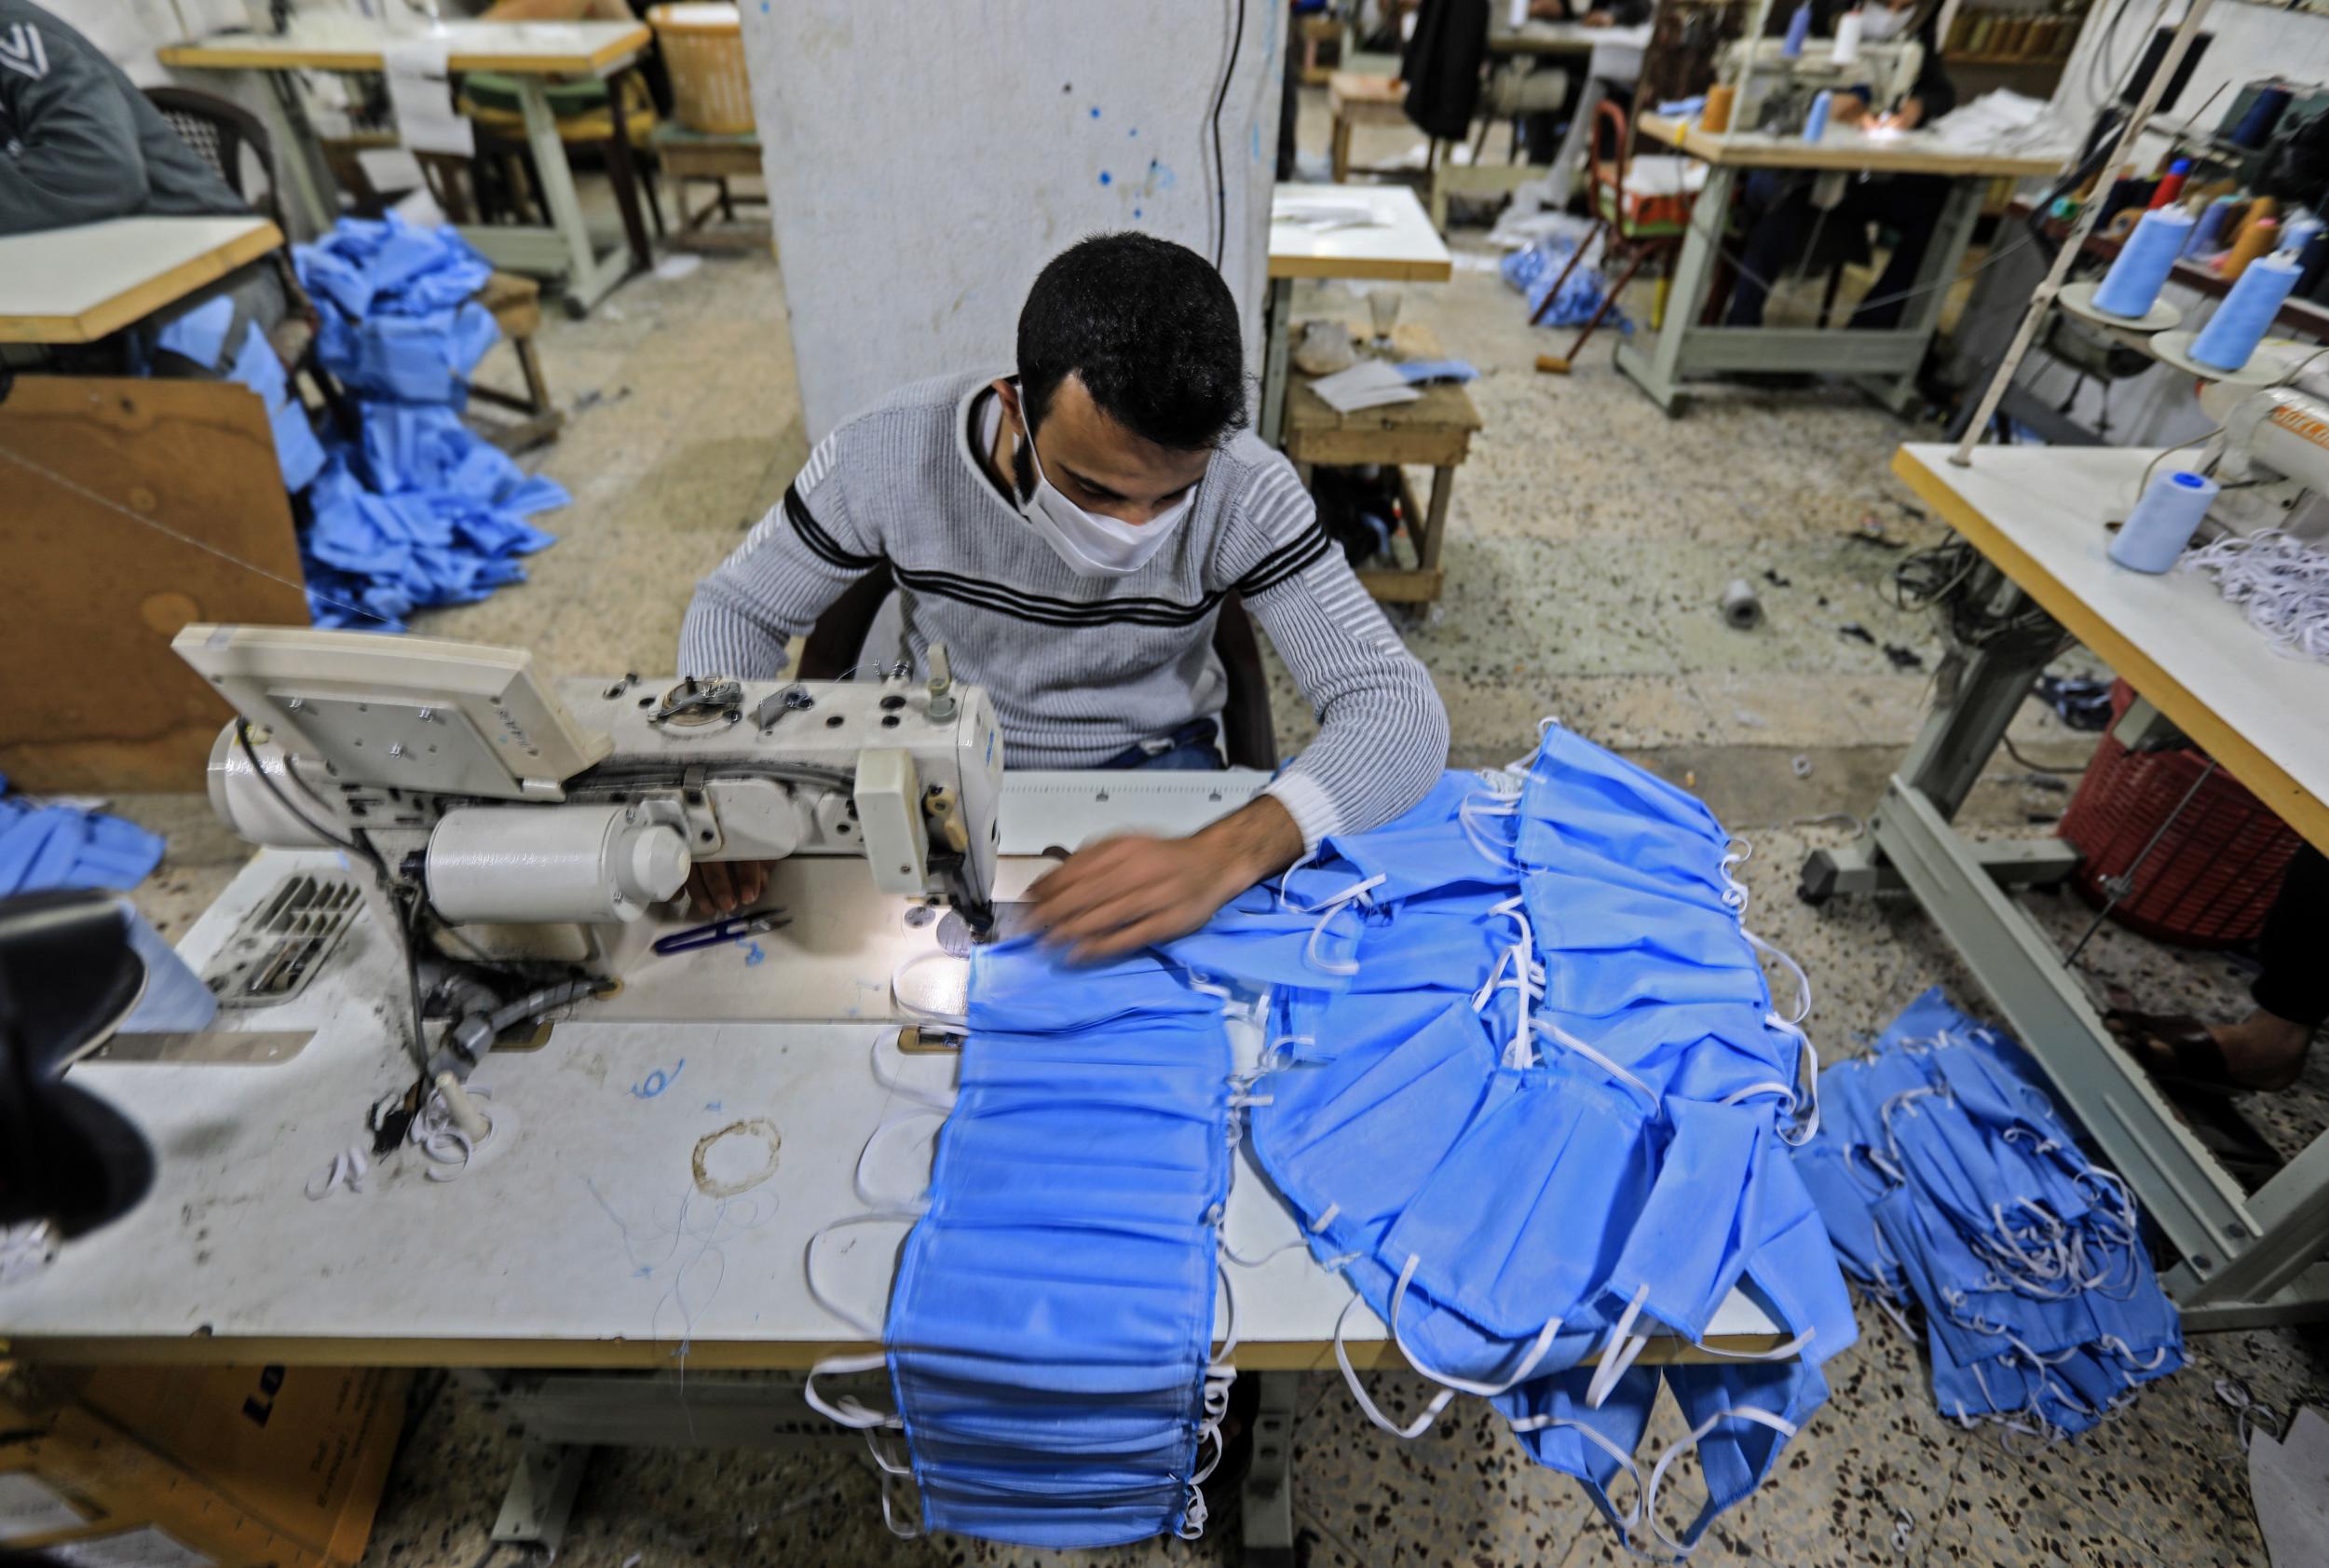 Palestinian workers manufacture protective coverall suits and masks at a workshop in Gaza City on March 30, 2020 amid coronavirus COVID-19 pandemic